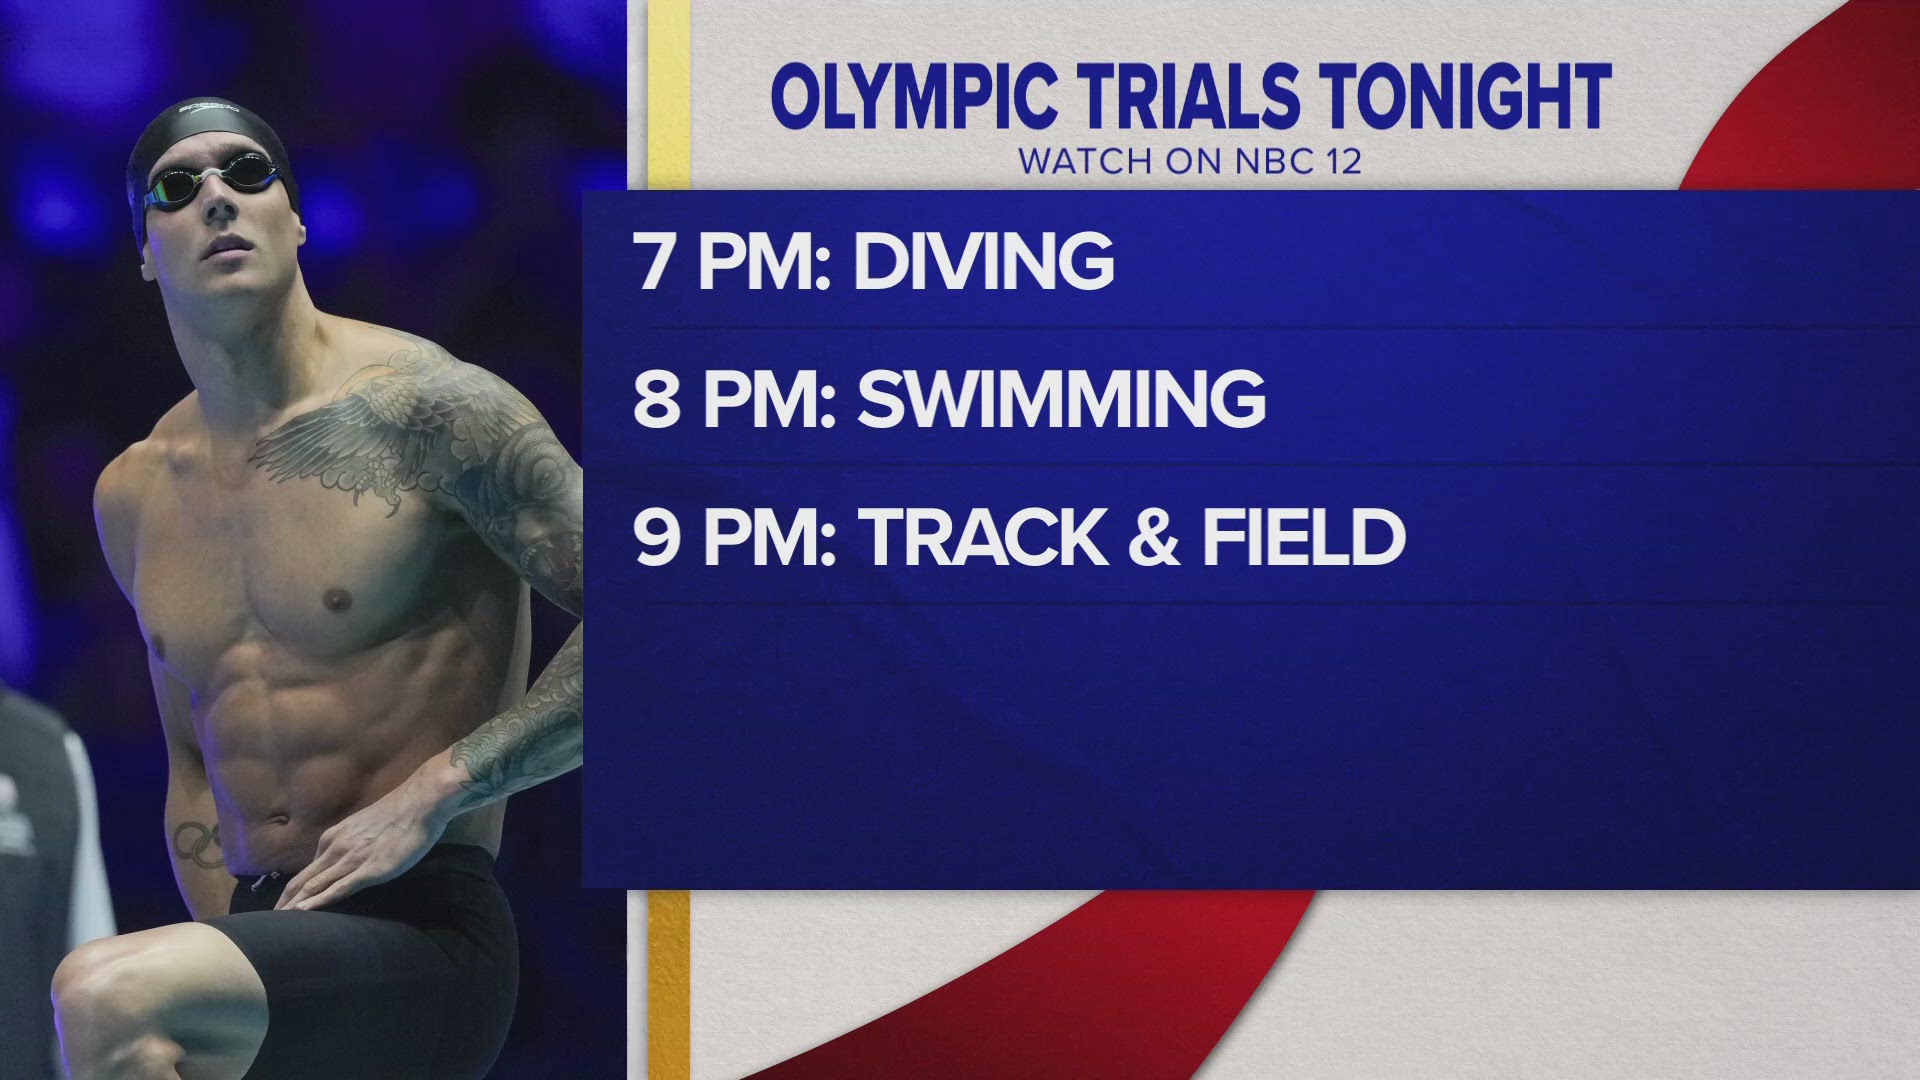 Green Cove Springs Native Caeleb Dressel and Ponte Vedra Beach native Christian Miller both had watch parties to support their Olympic dreams Saturday night.